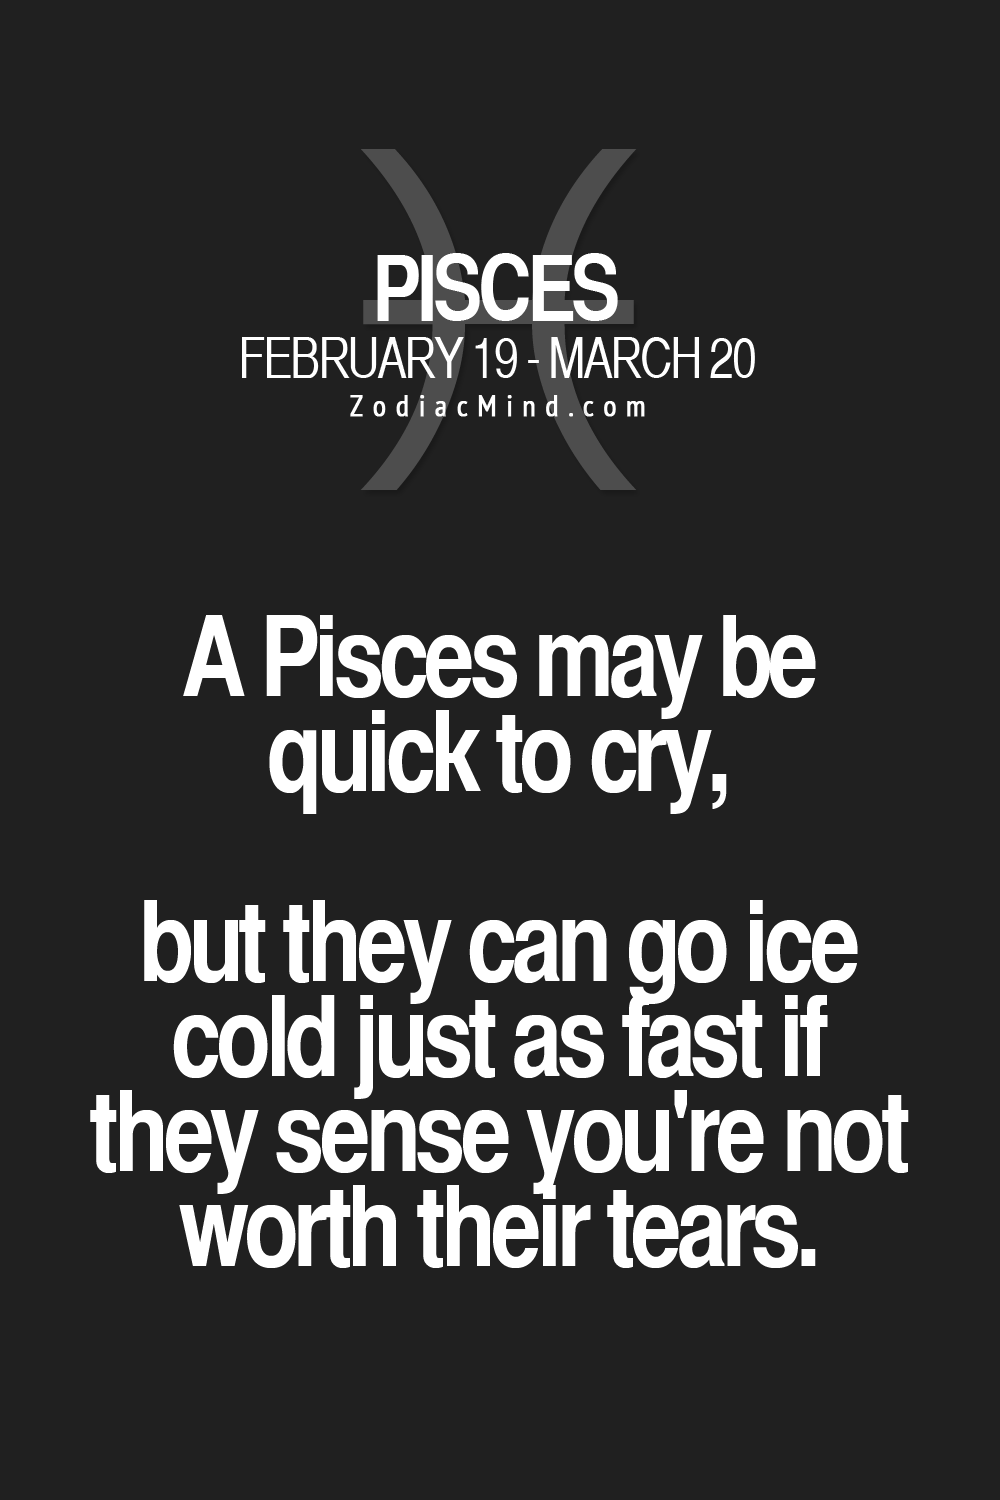 A Pisces may be quick to cry, but they can go ice cold just as fast if they sense youre not worth their tears.